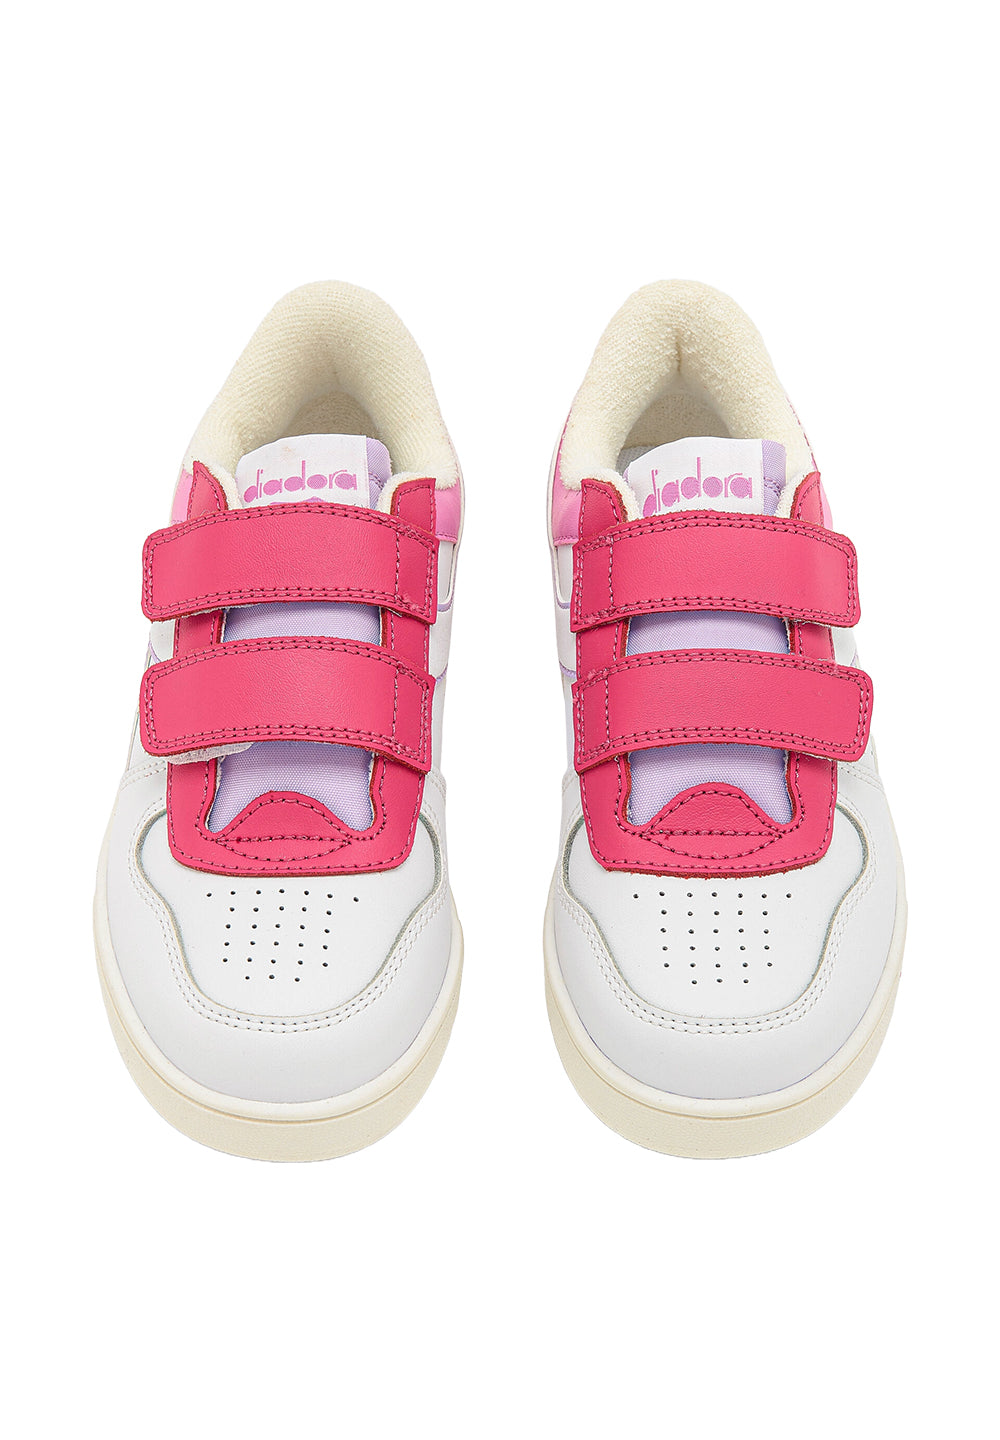 White-pink shoes for girls